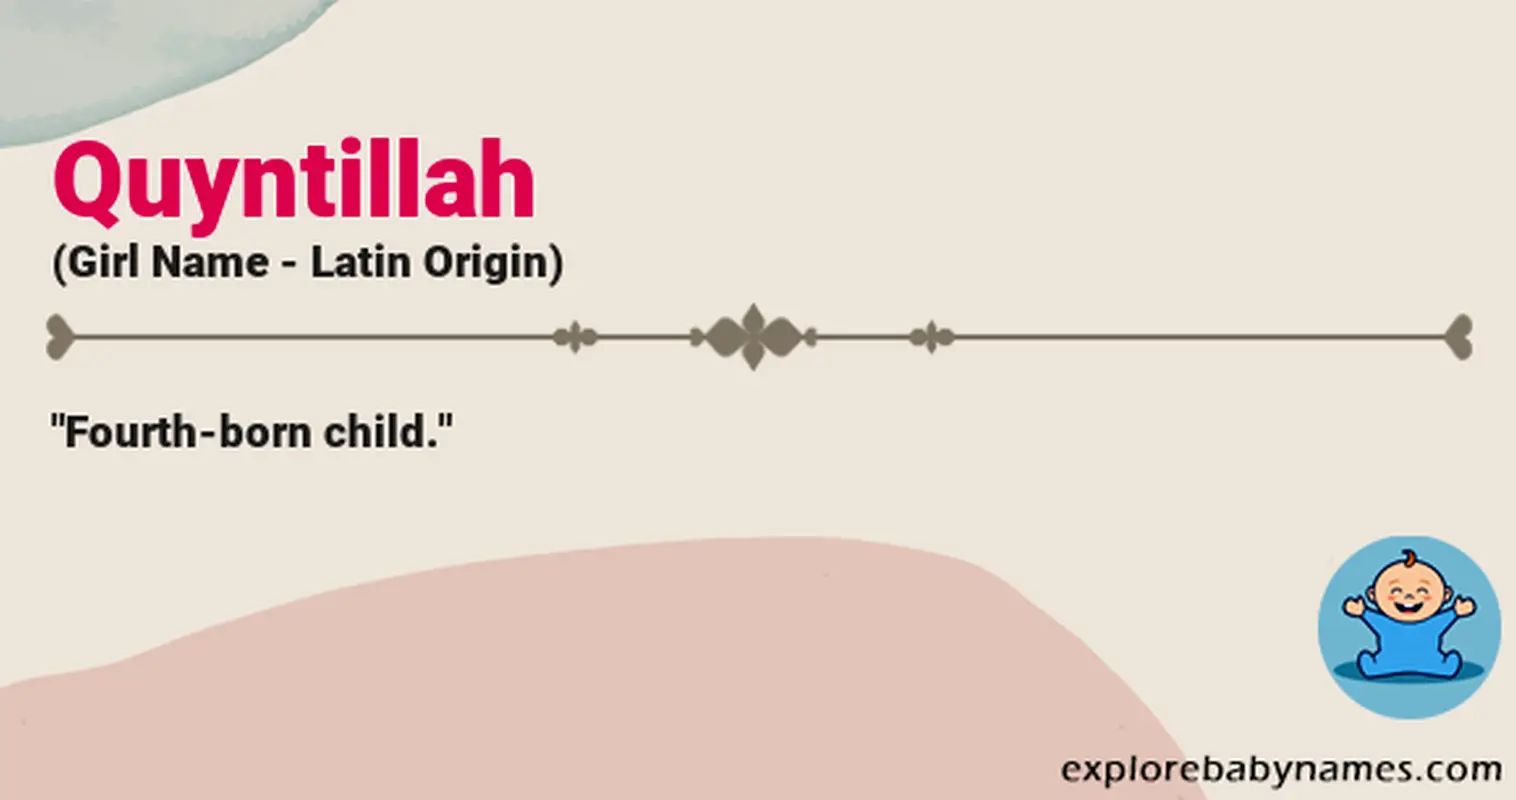 Meaning of Quyntillah